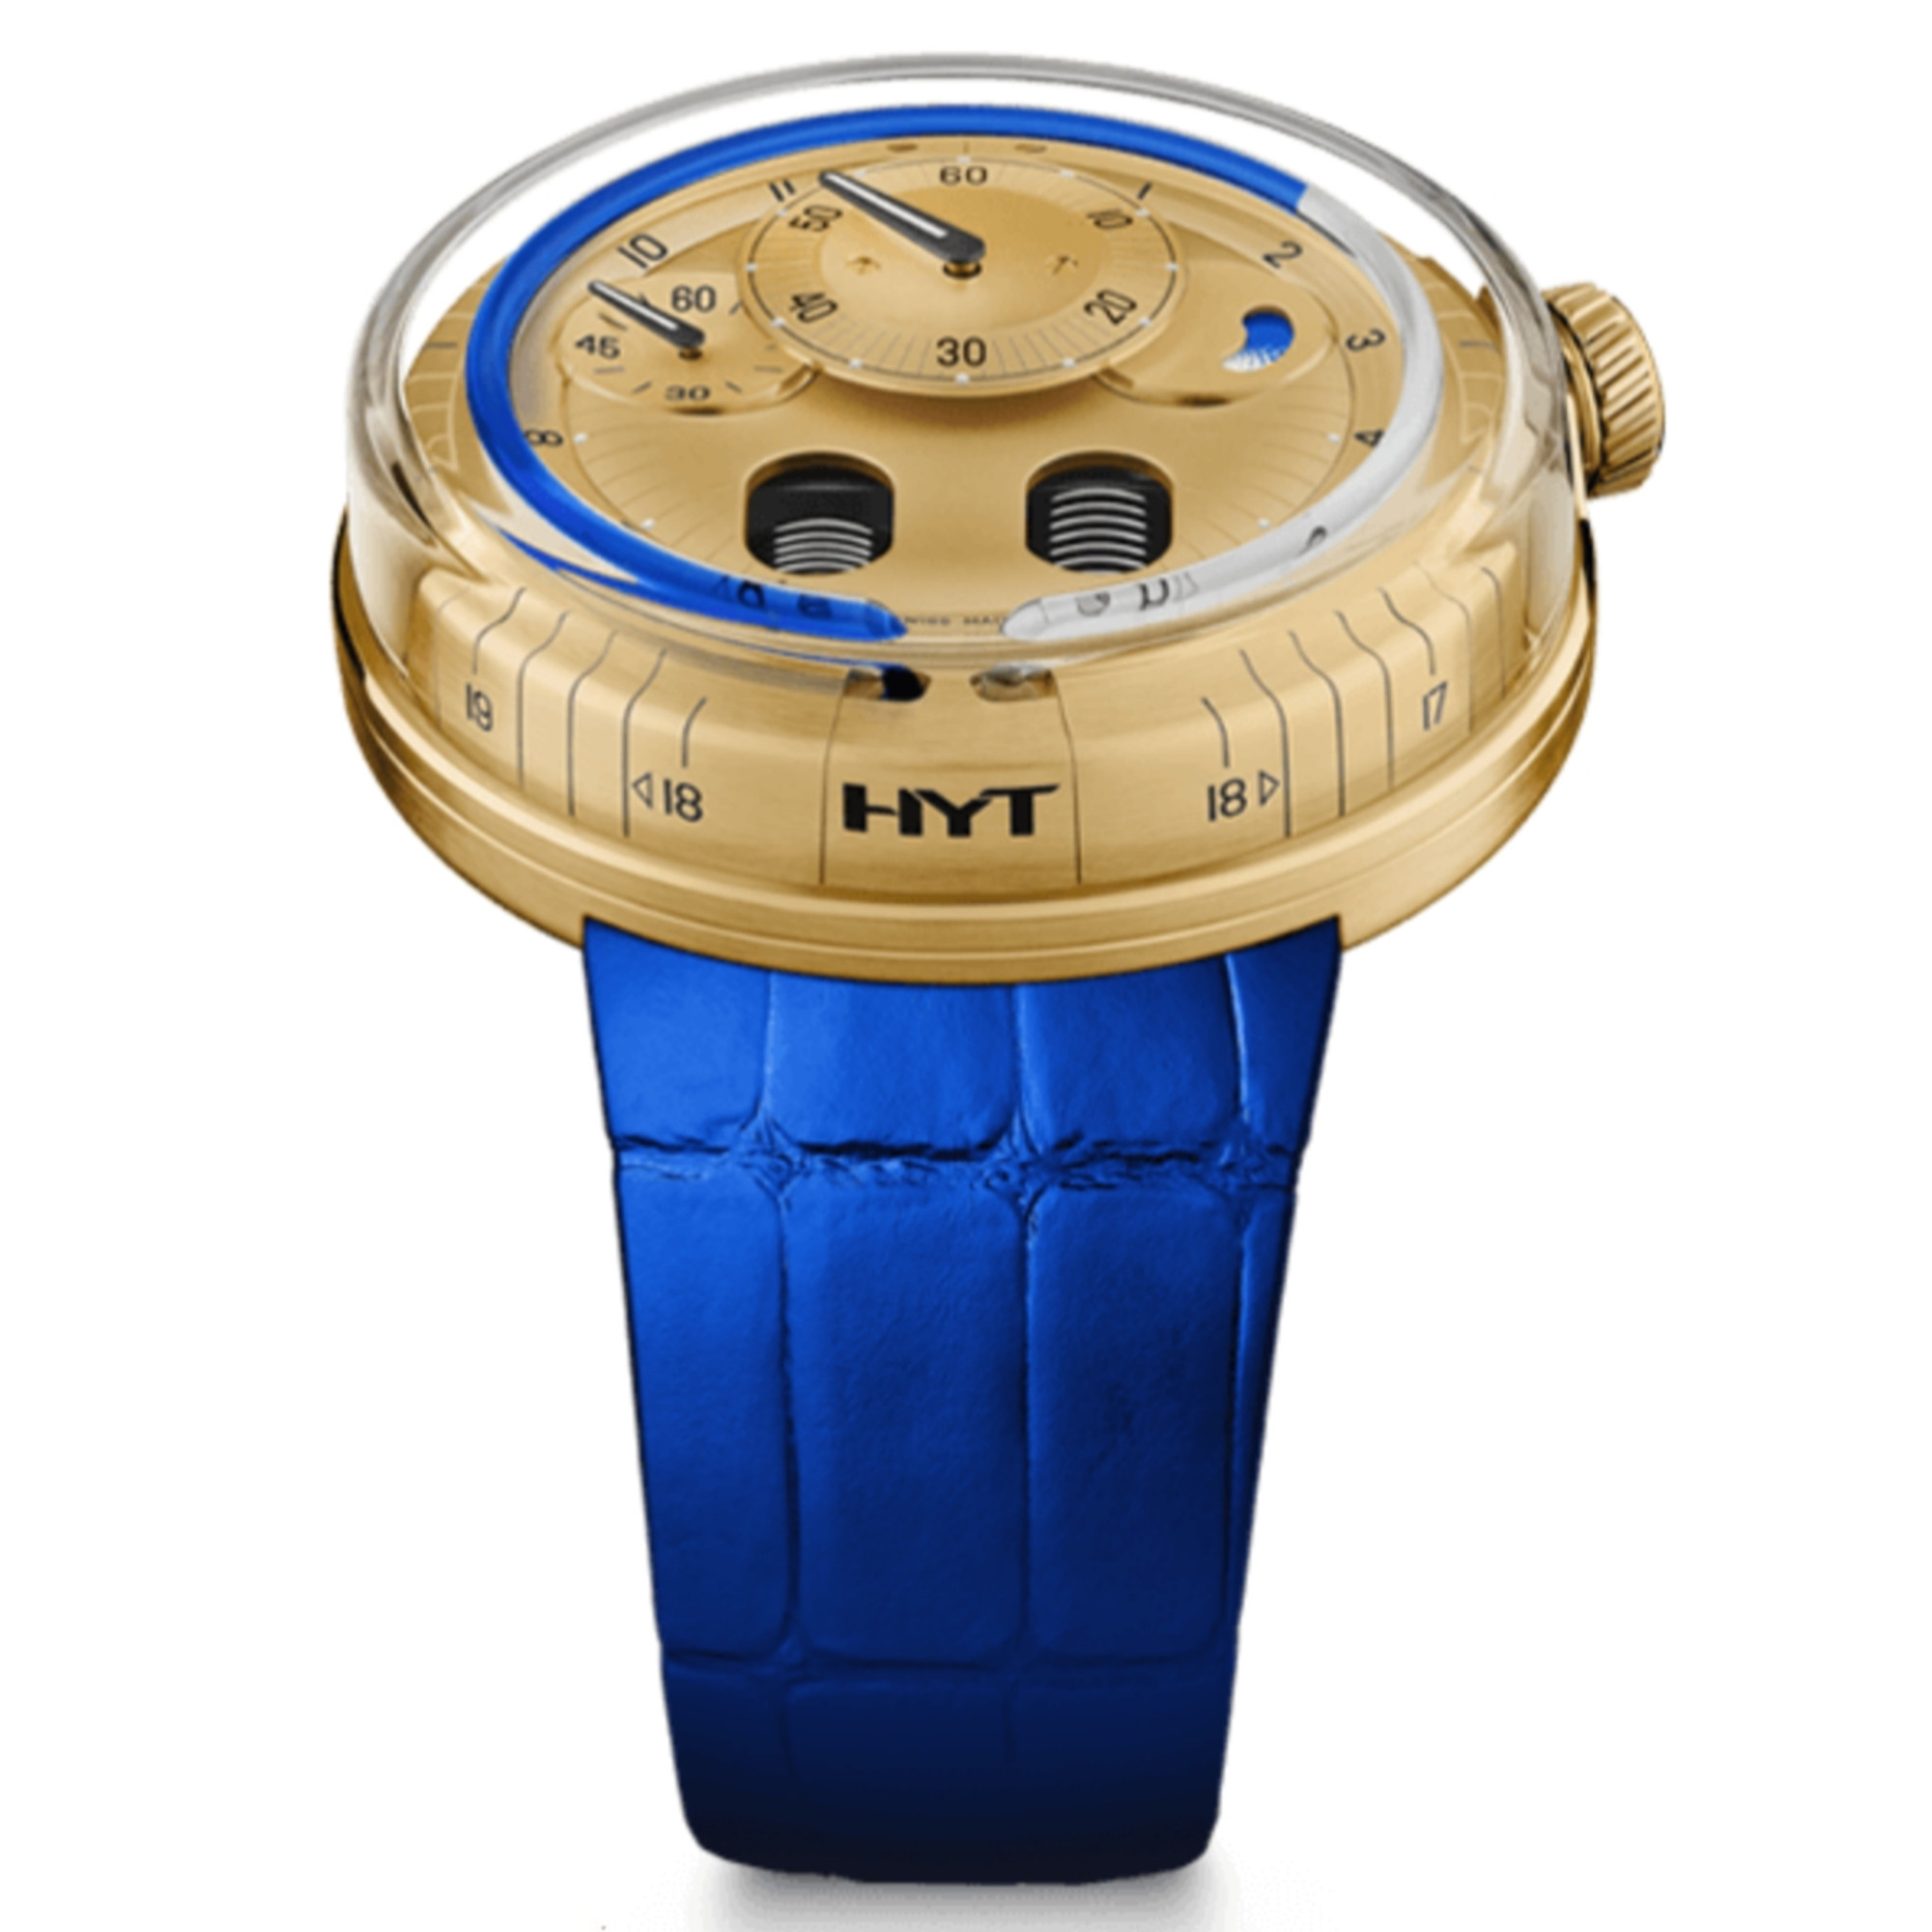 New HYT H0 Yellow Gold Blue Accents